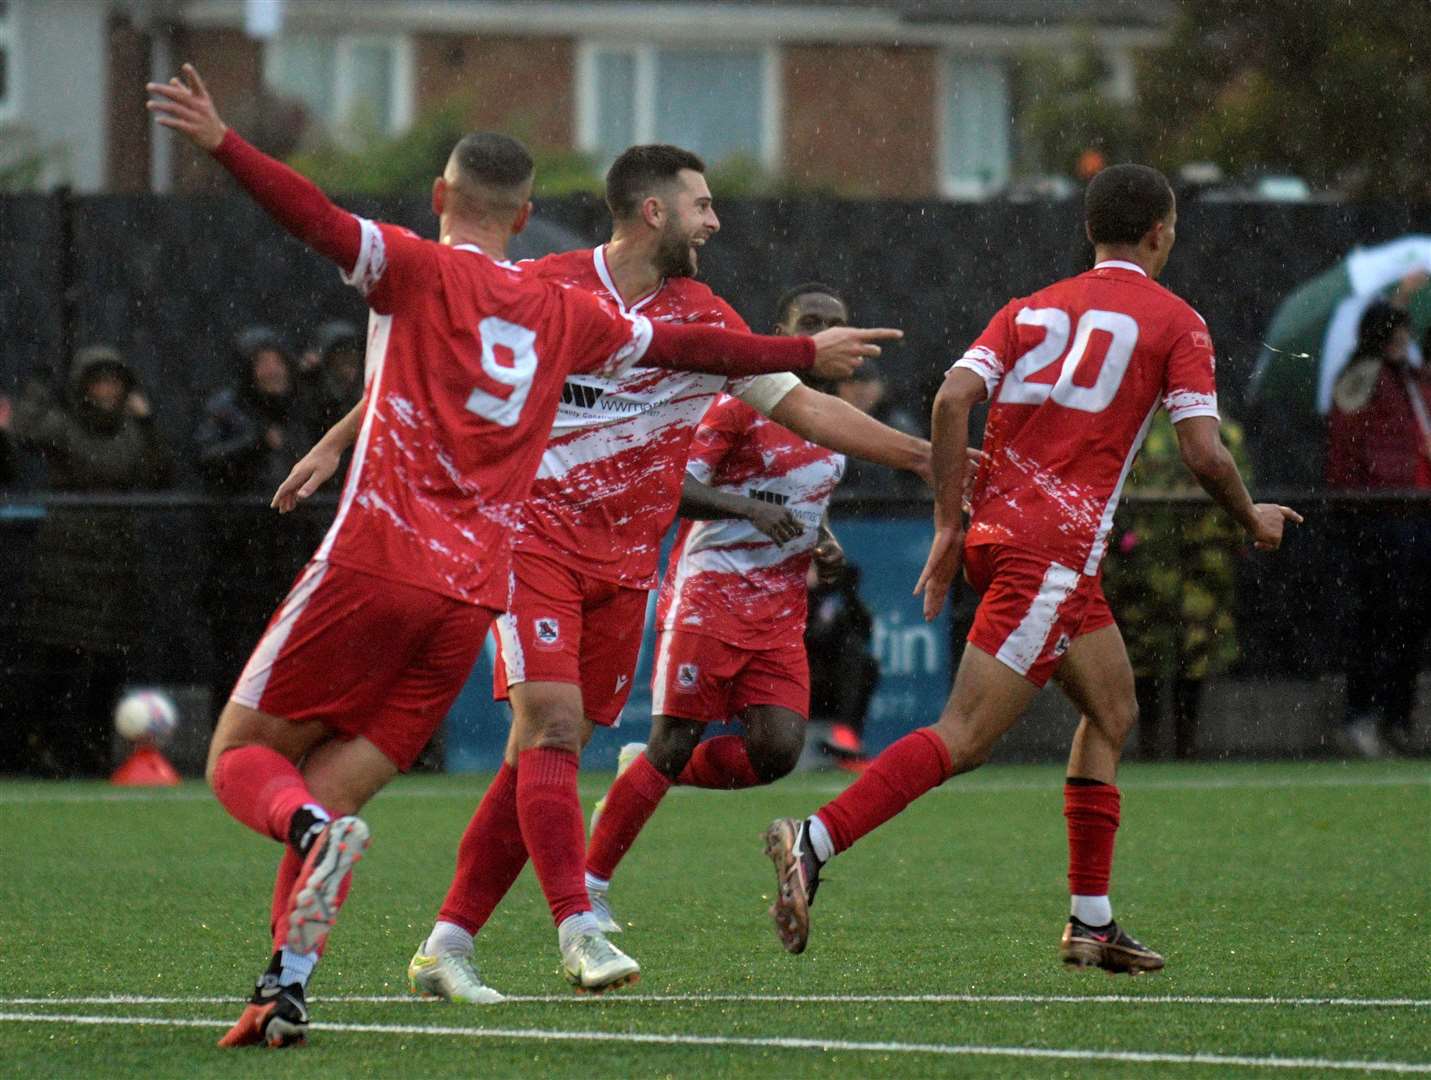 TJ Jadama (No.20) celebrates after scoring Ramsgate’s equaliser against Woking. Picture: Barry Goodwin